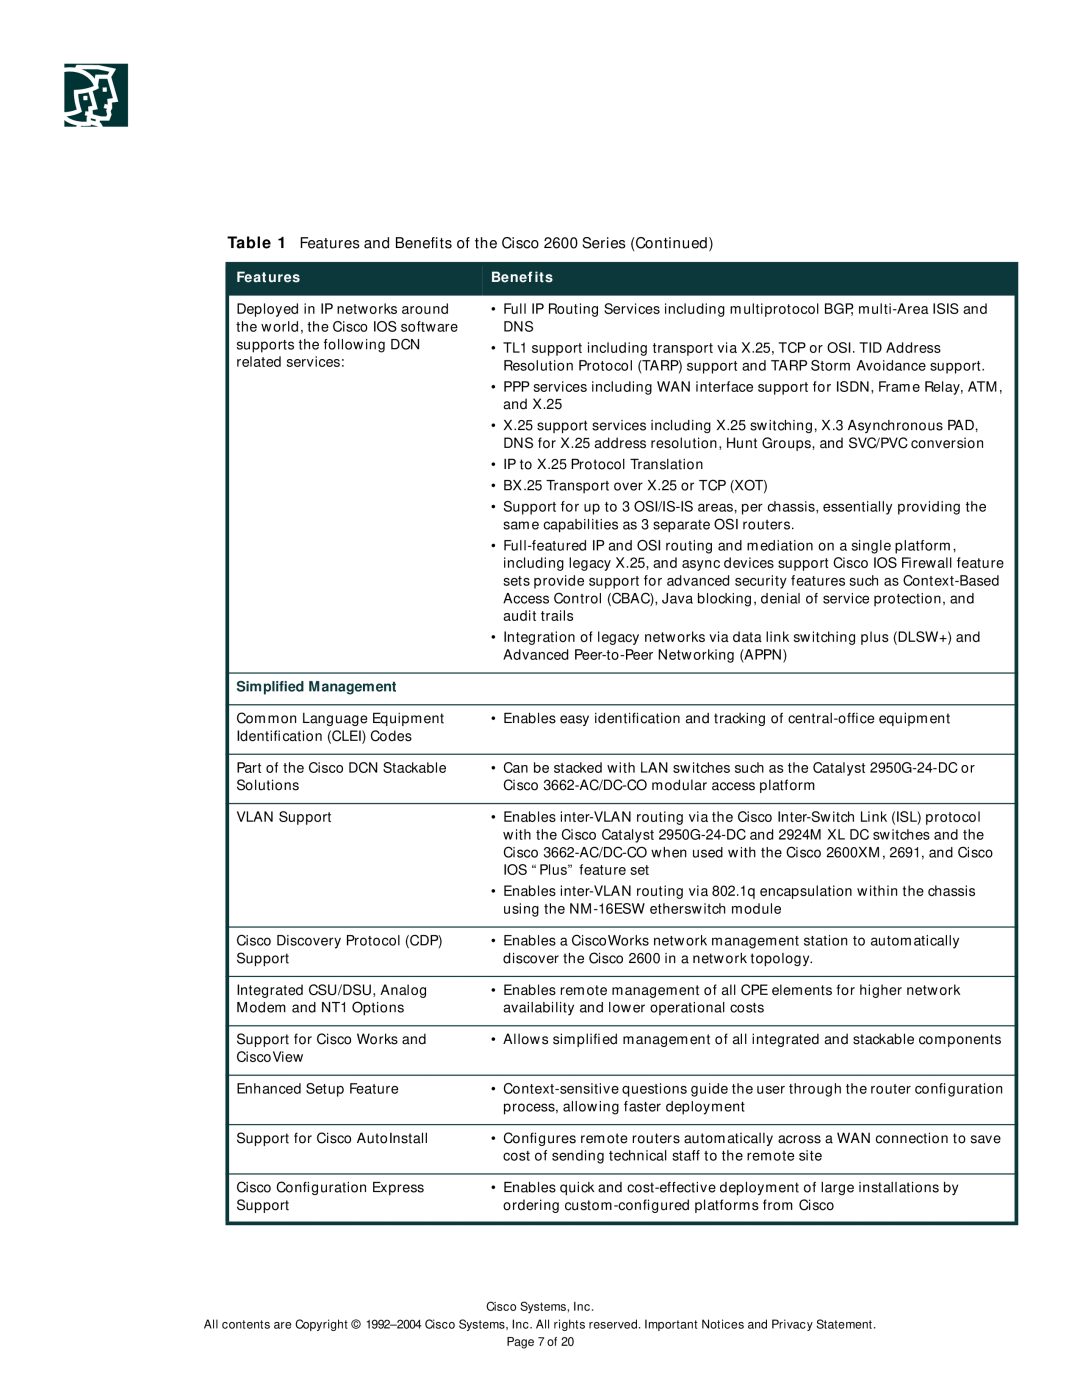 Cisco Systems 2600-DC Series manual Features, Benefits, Simpliﬁed Management 